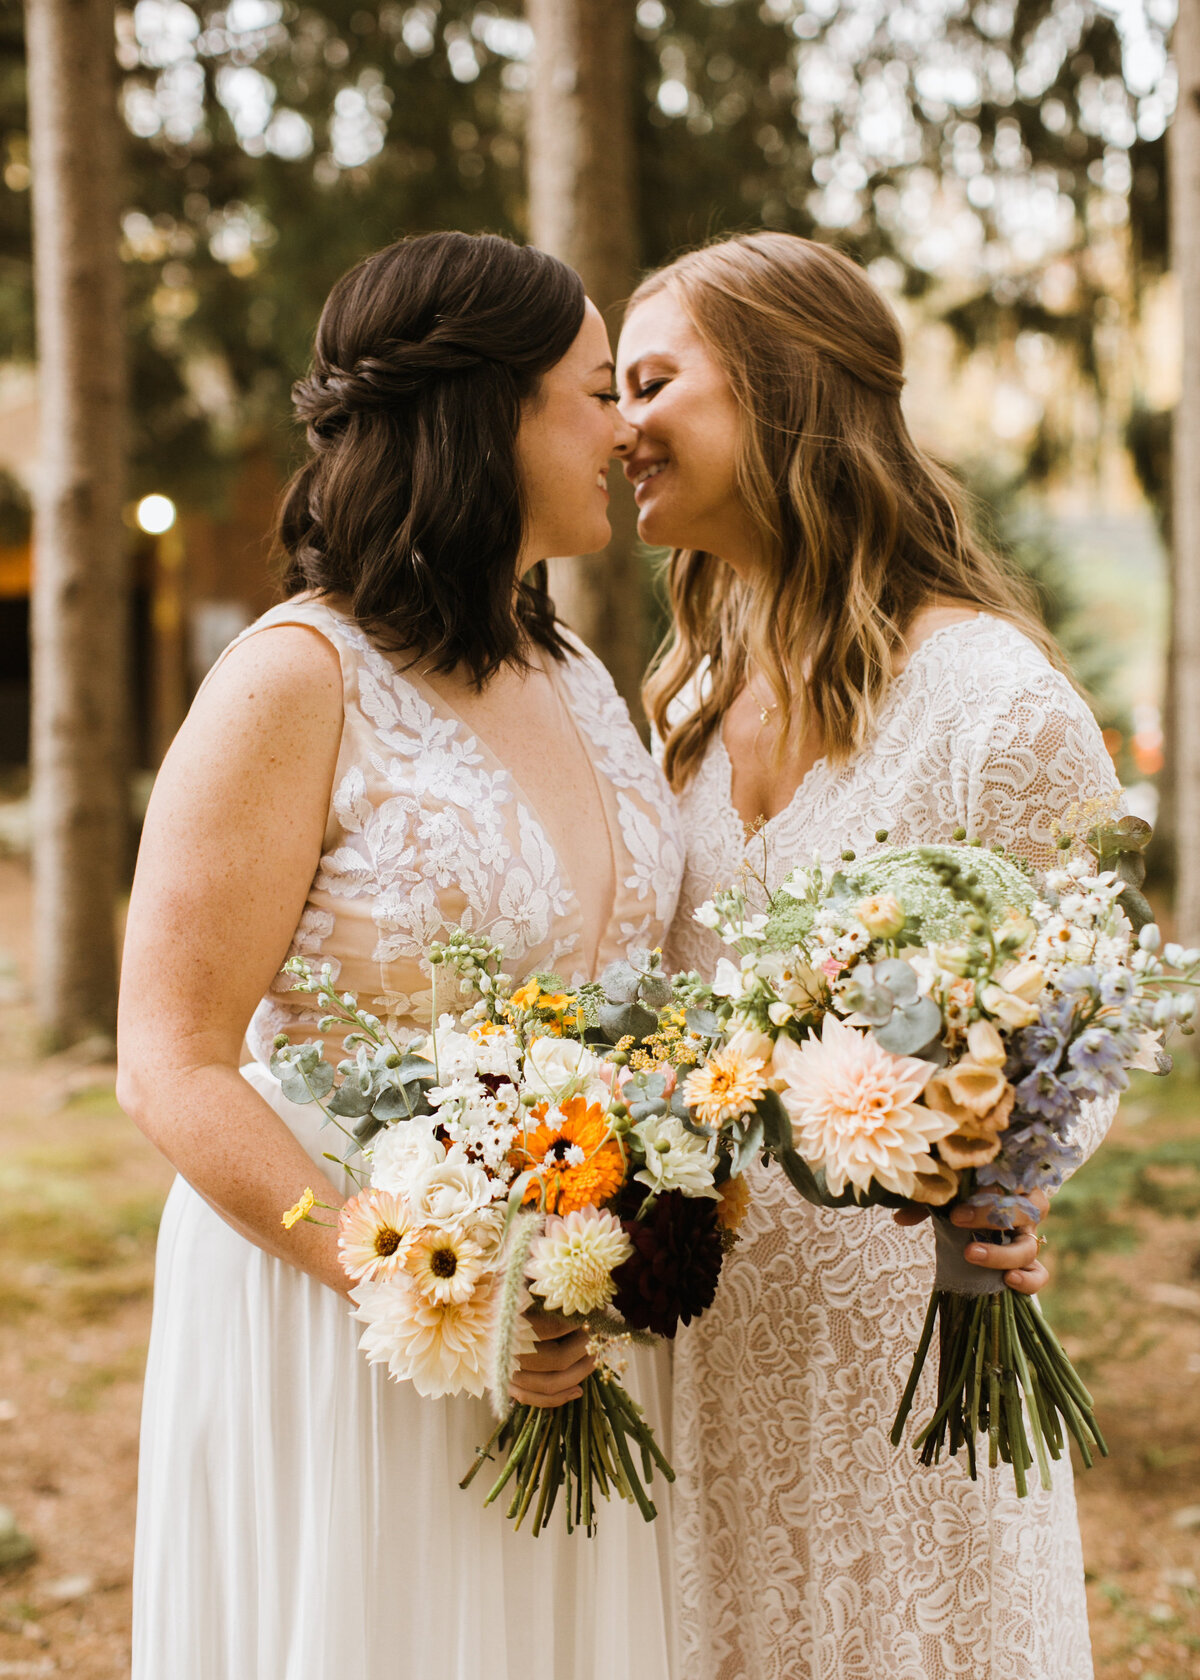 erica-renee-beauty-hair-and-makeup-two-brides-same-sex-wedding-elopement-lace-halfup-half-down-hairstyles-clean-beauty-chatfield-hollow-inn